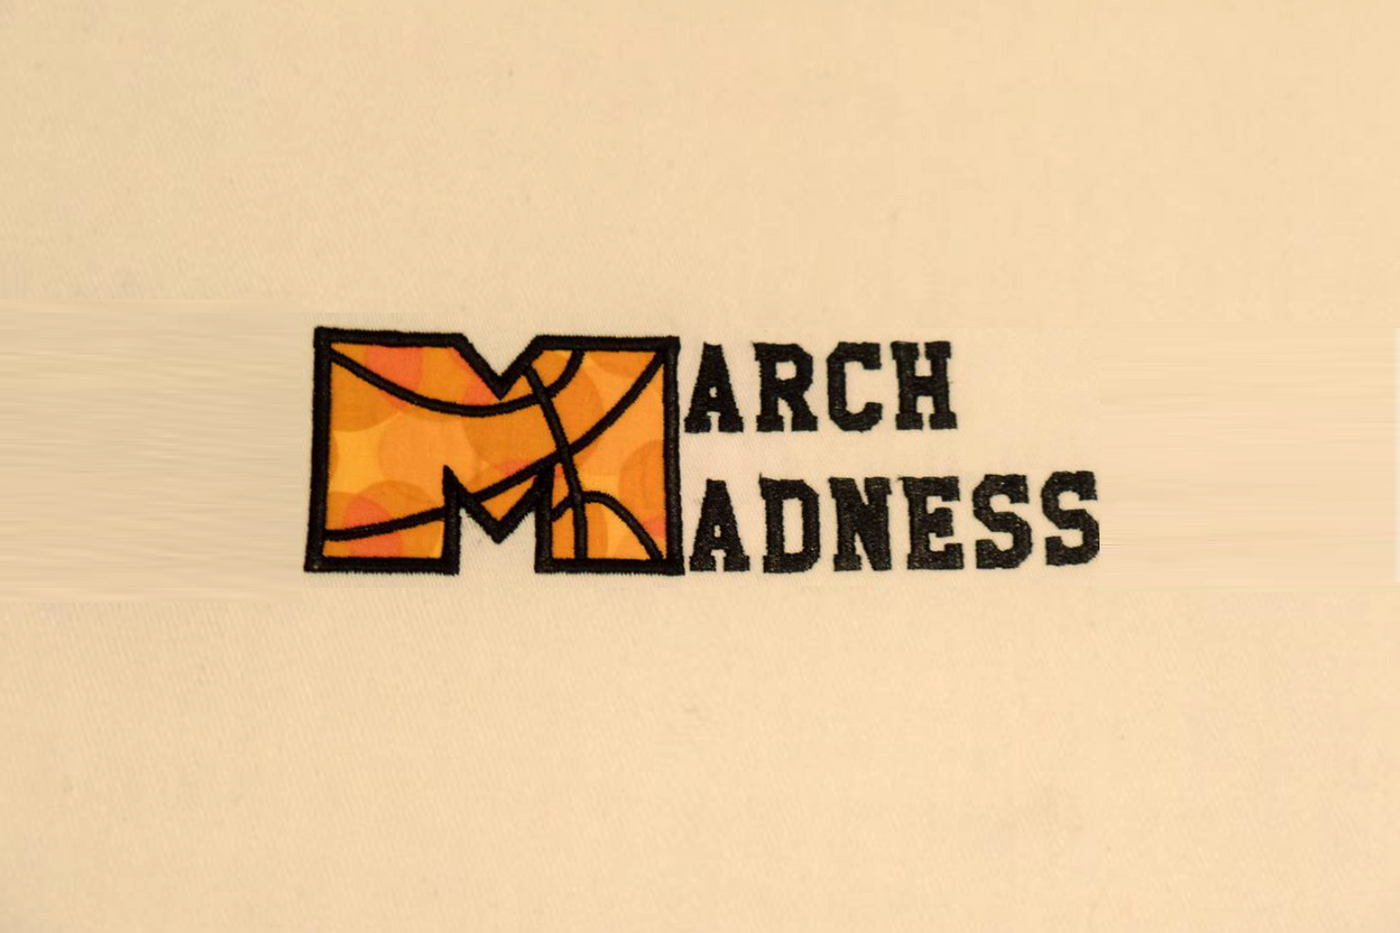 March Madness basketball applique